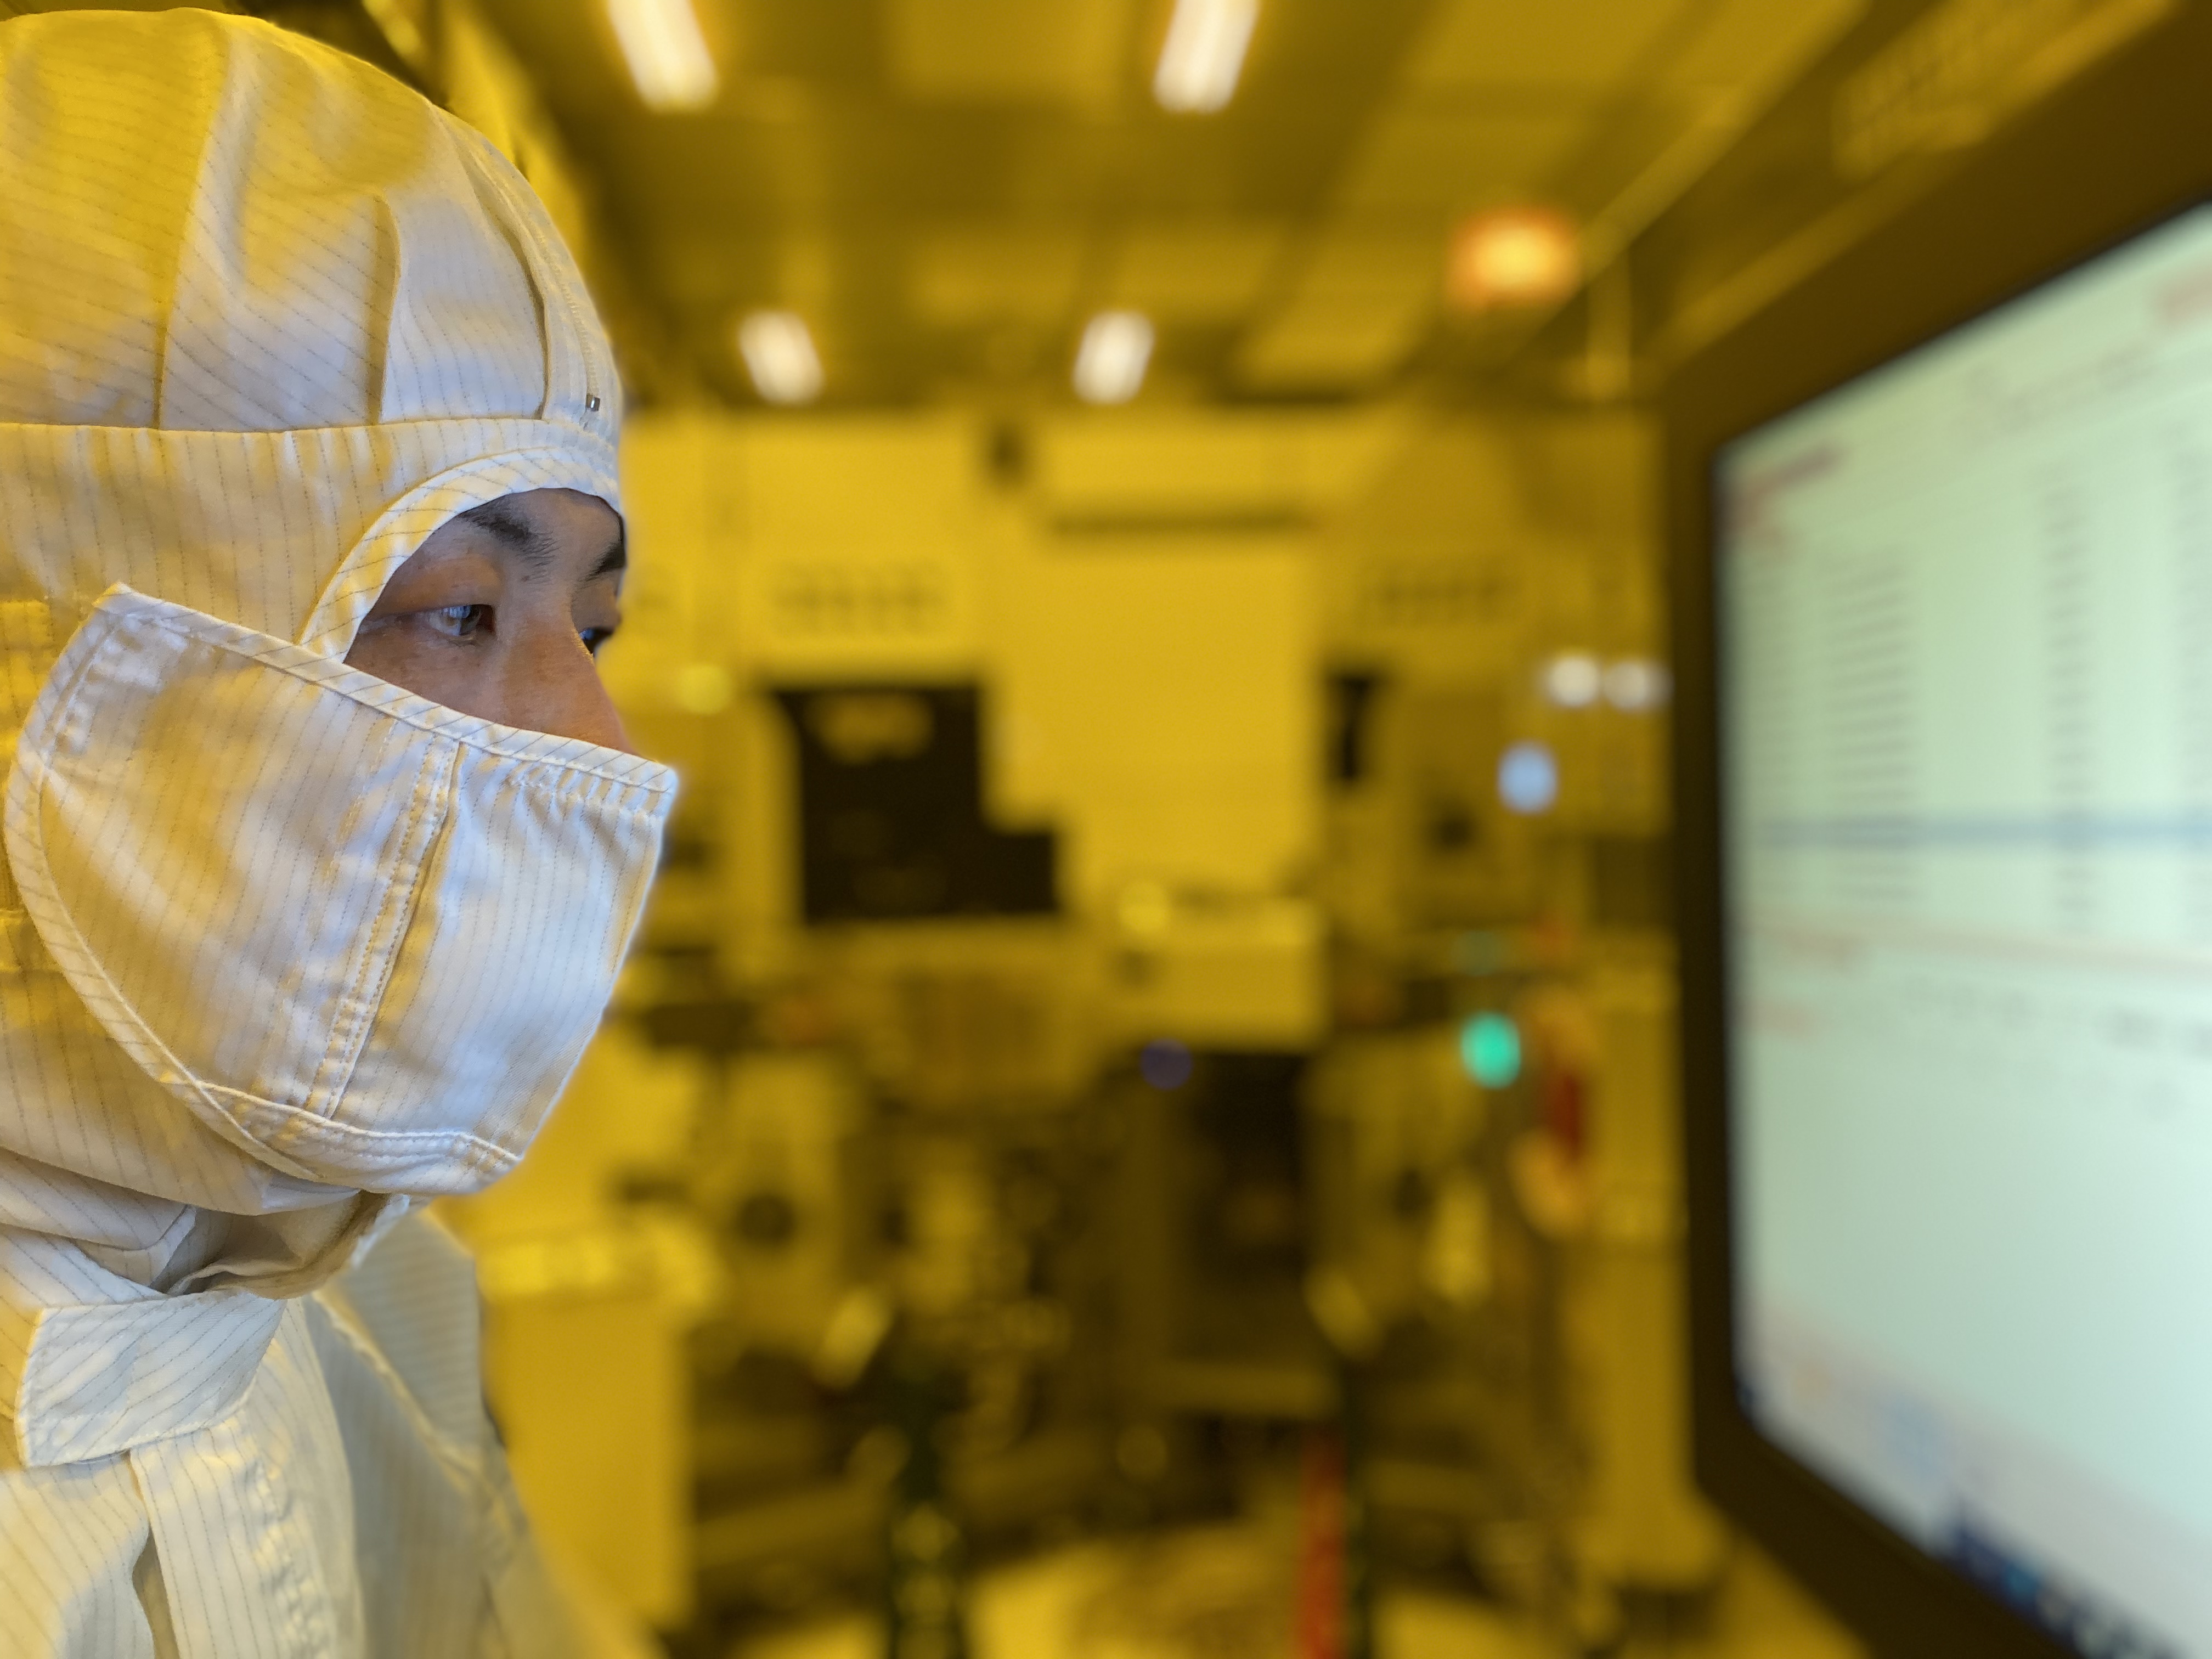 Taniguchi in the clean room, adjusting processing conditions for manufacturing equipment